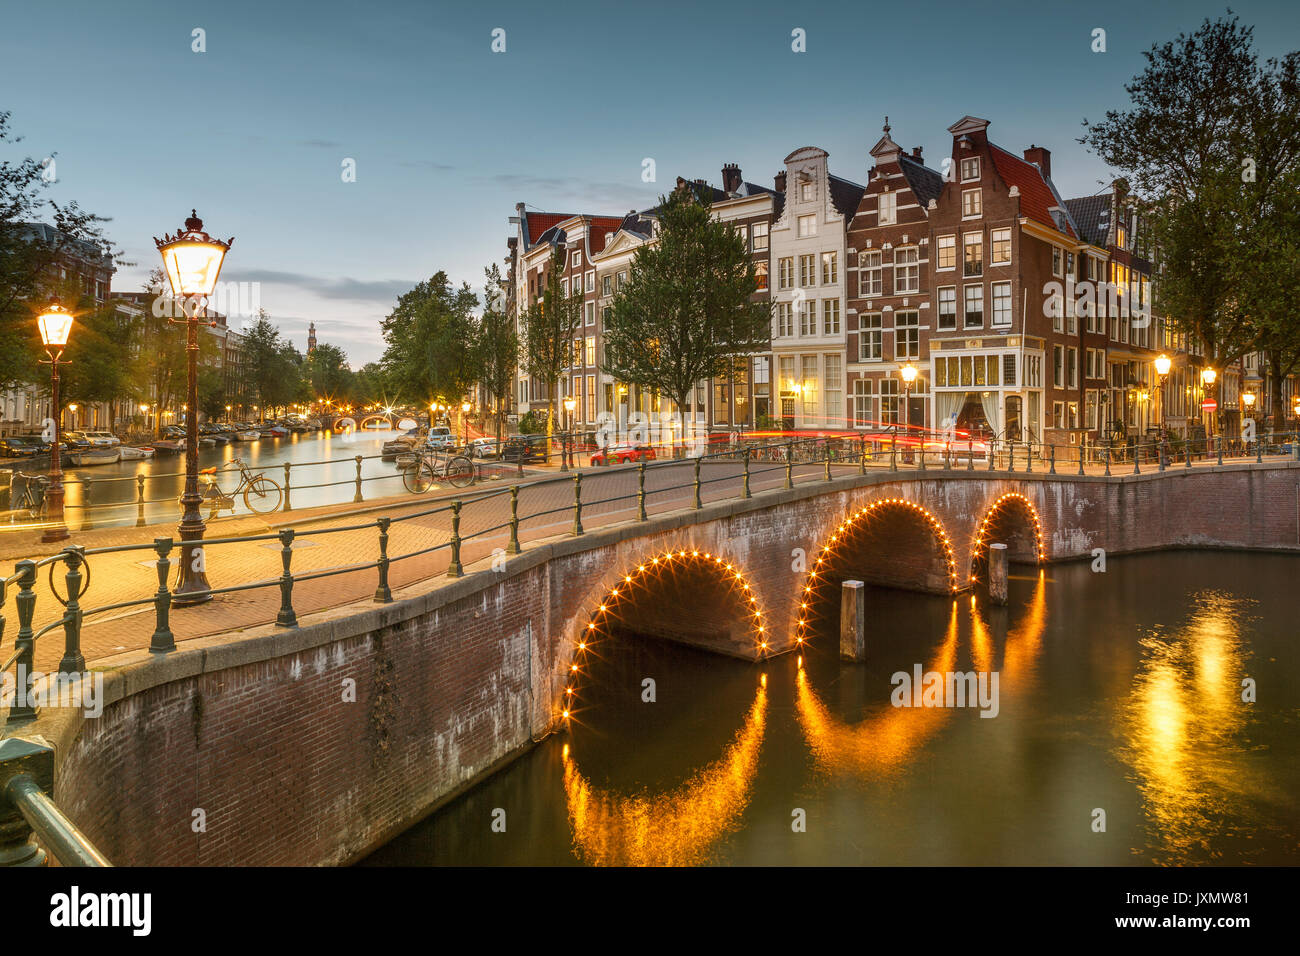 Hook of Holland at night, South Holland, Netherlands Stock Photo